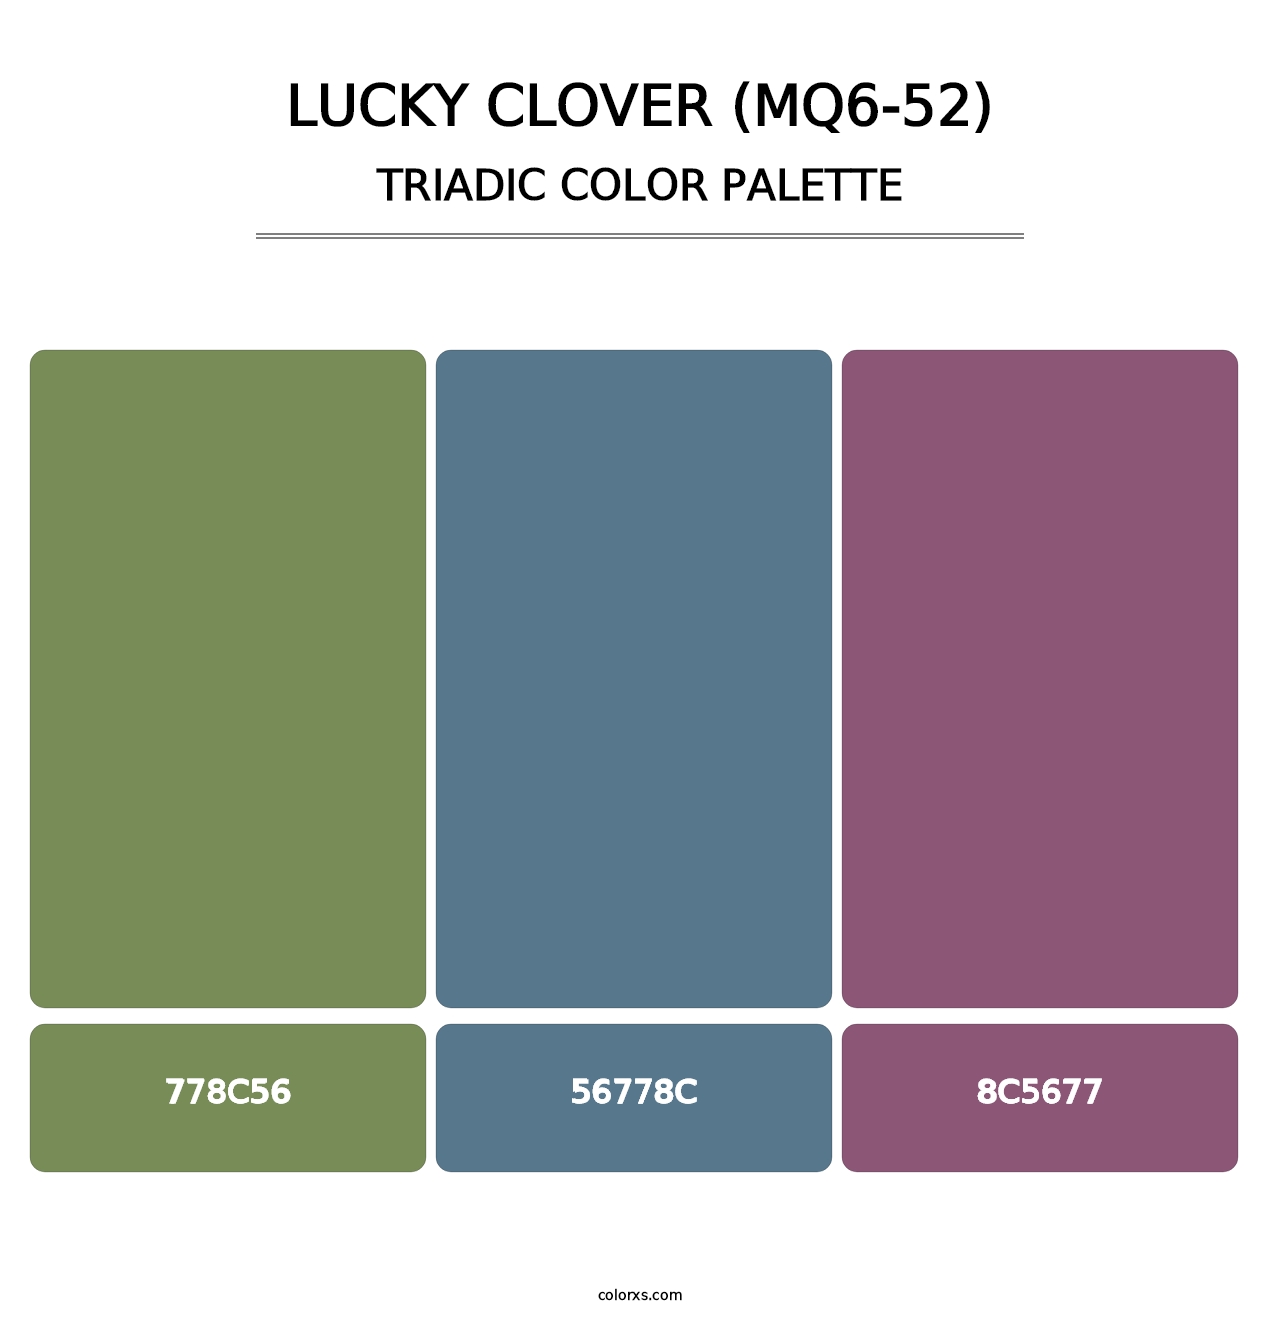 Lucky Clover (MQ6-52) - Triadic Color Palette